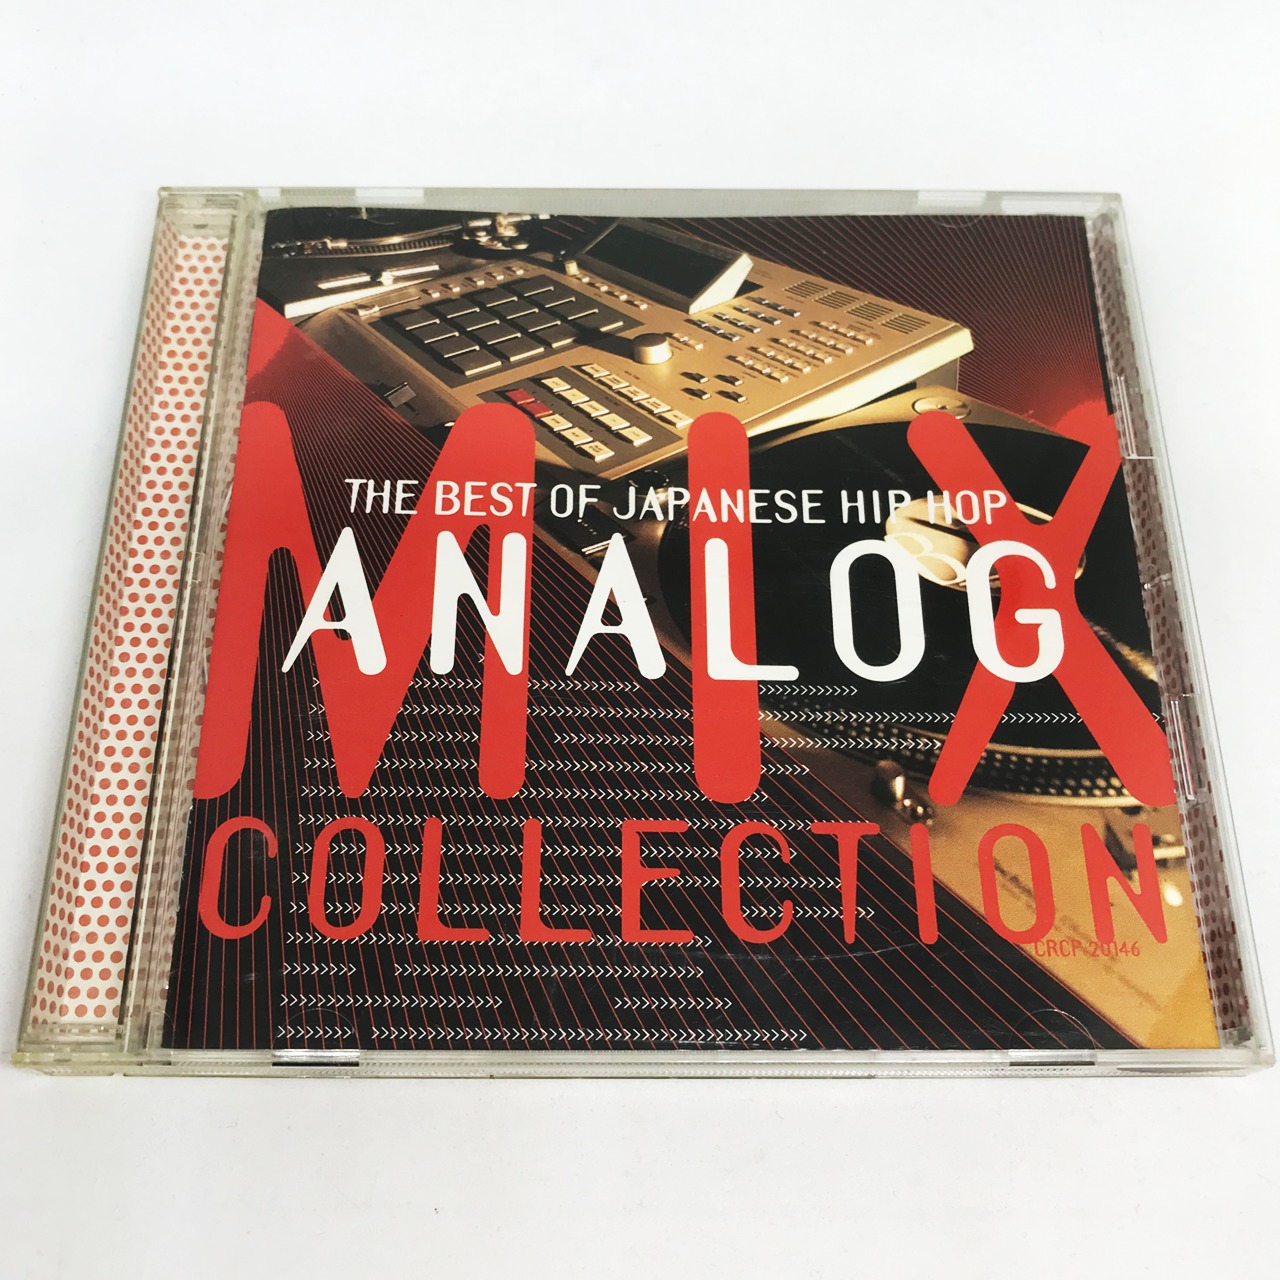 The Japanese Hiphop Analog Mix Collection